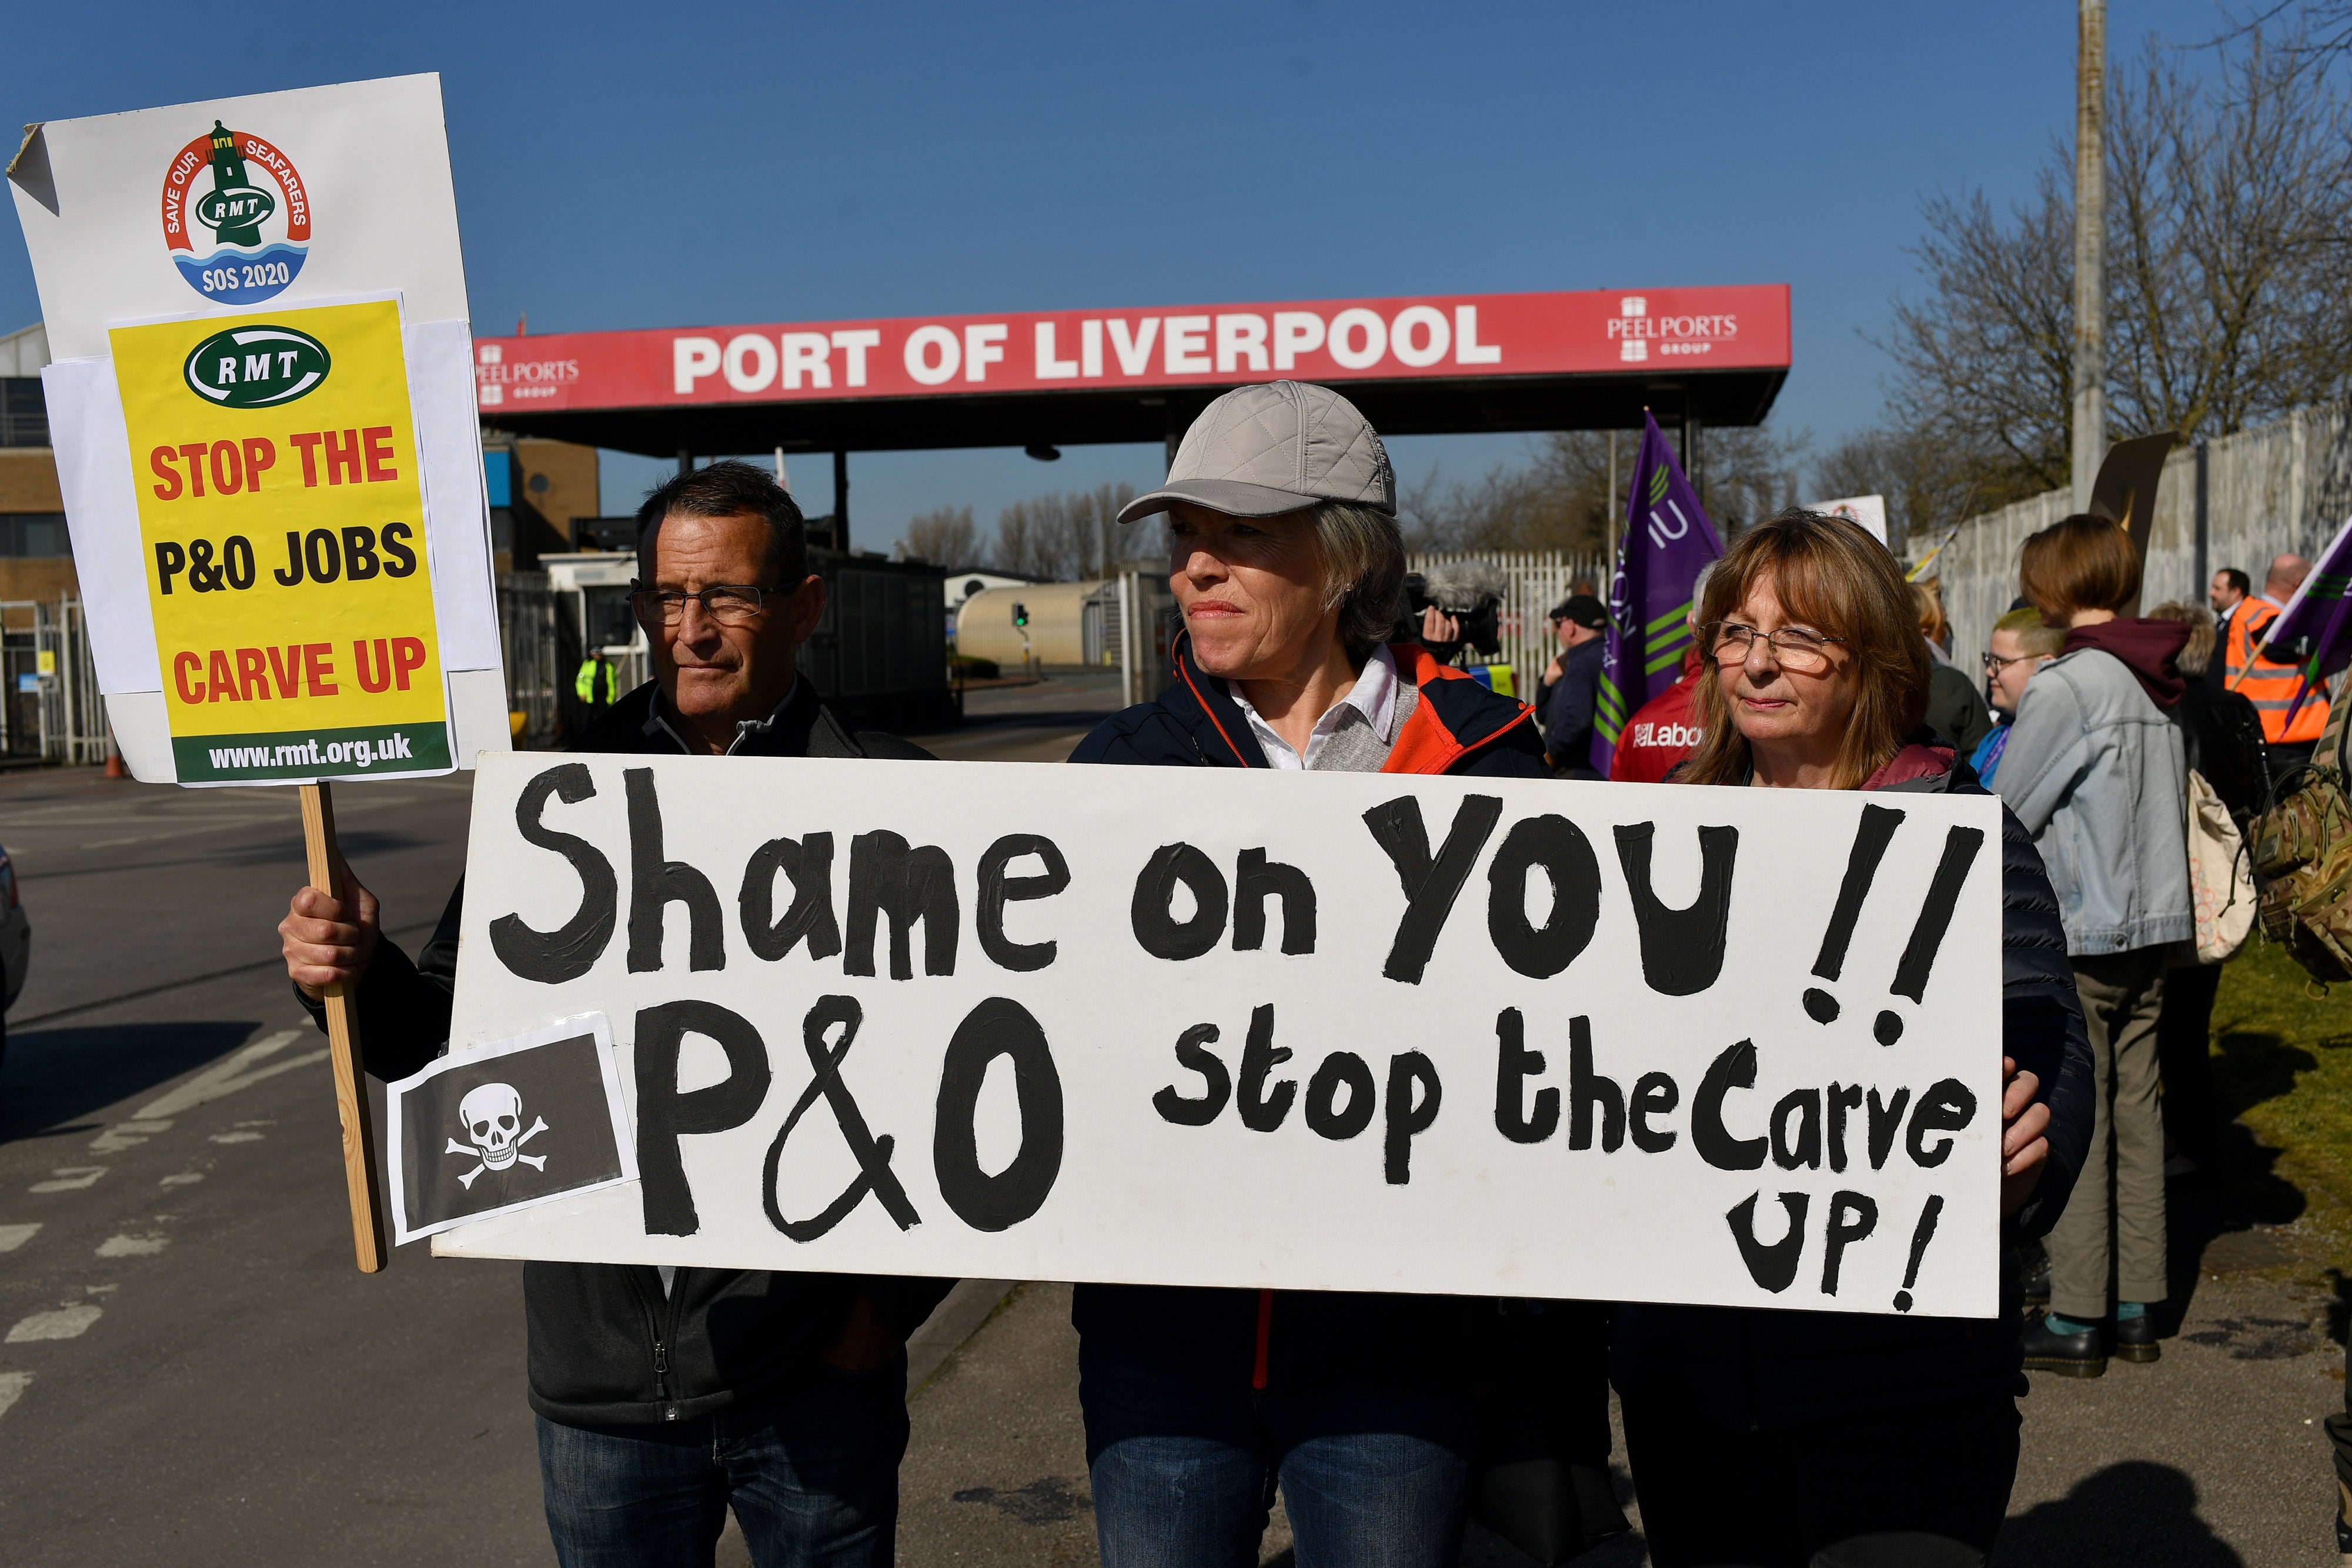 Demonstrators gathered outside the entrance to the Port of Liverpool on Friday